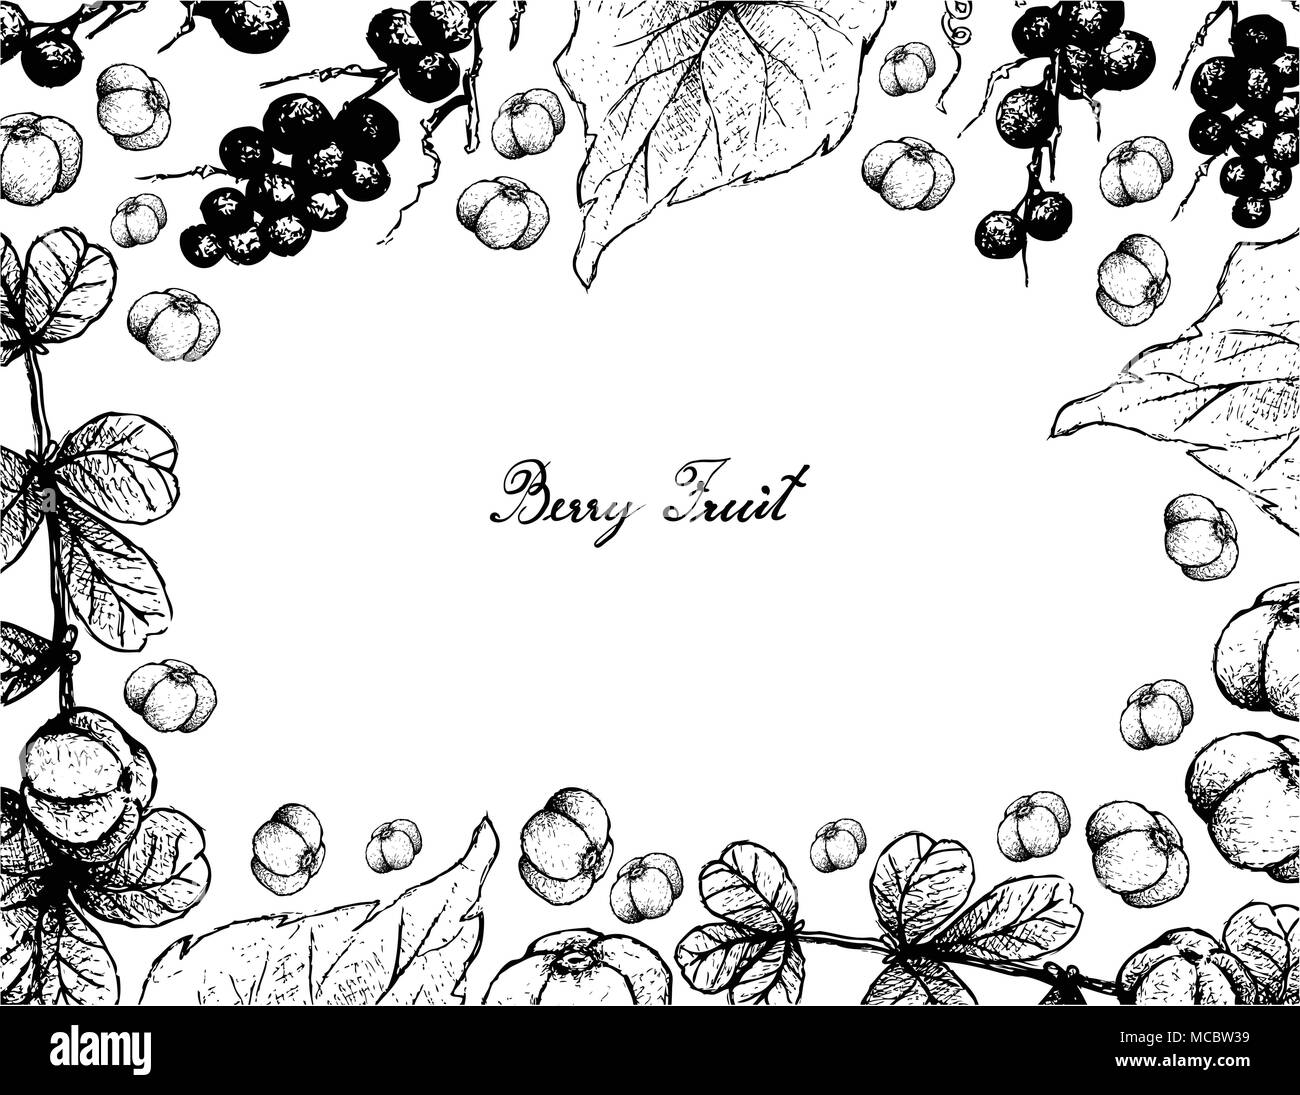 Berry Fruit, Illustration Frame of Hand Drawn Sketch of Red and Sweet Canthium Berberidifolium and Ampelocissus Martinii Fruits Isolated on White Back Stock Vector